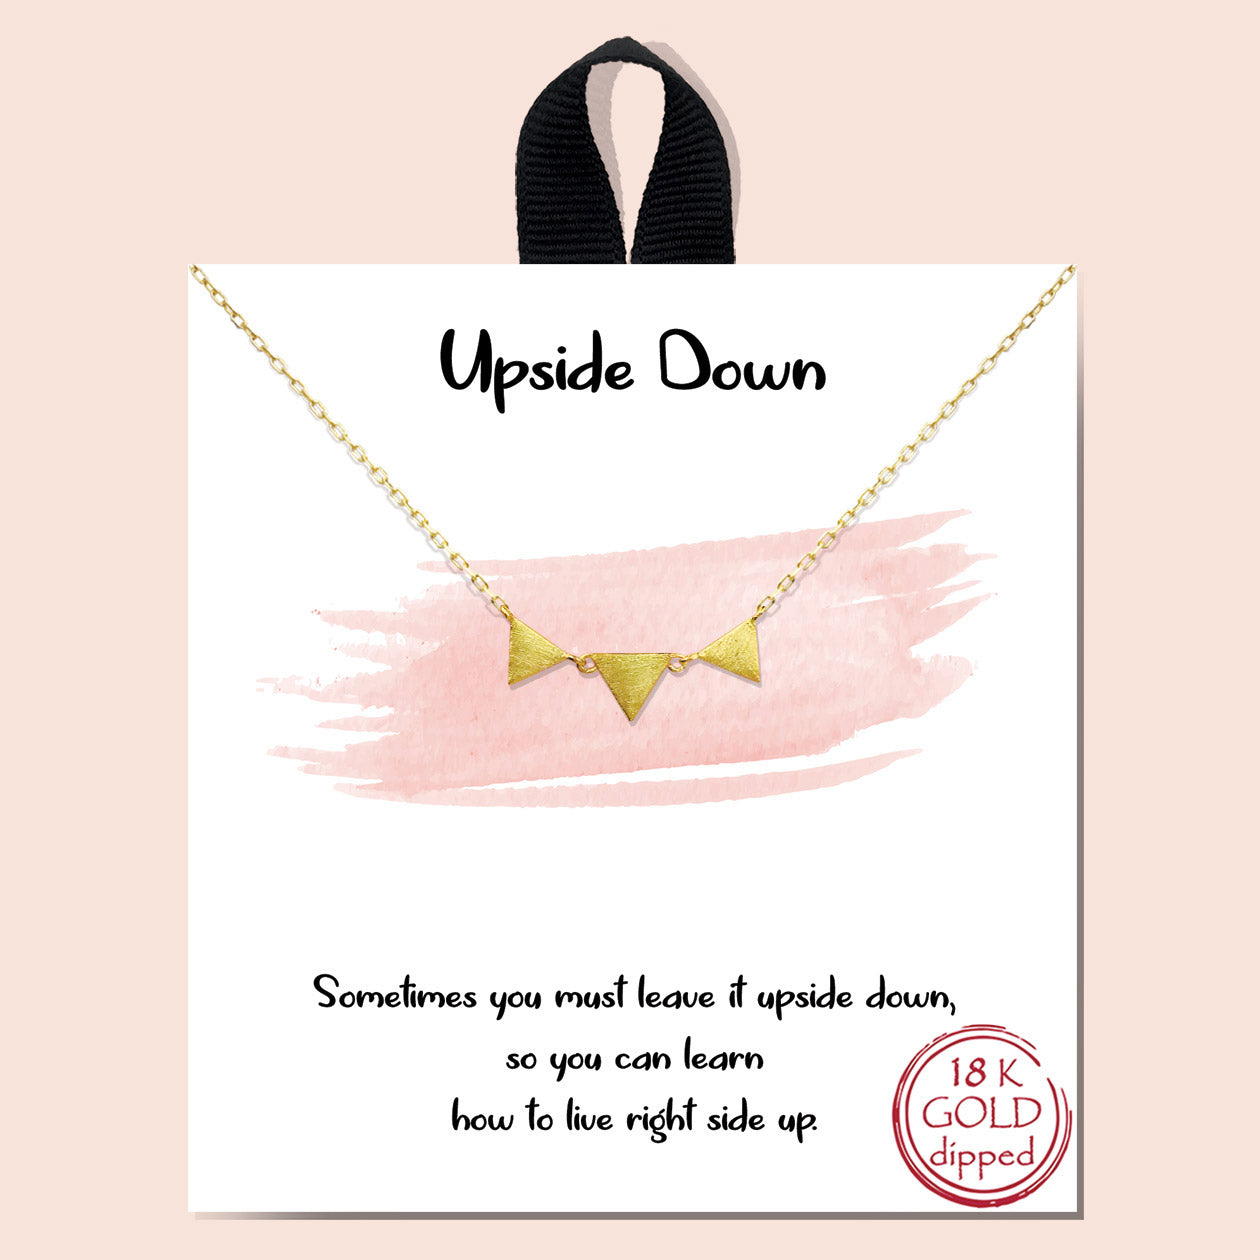 Necklace with Inspo card - Gold - Many Styles - All Sales Final